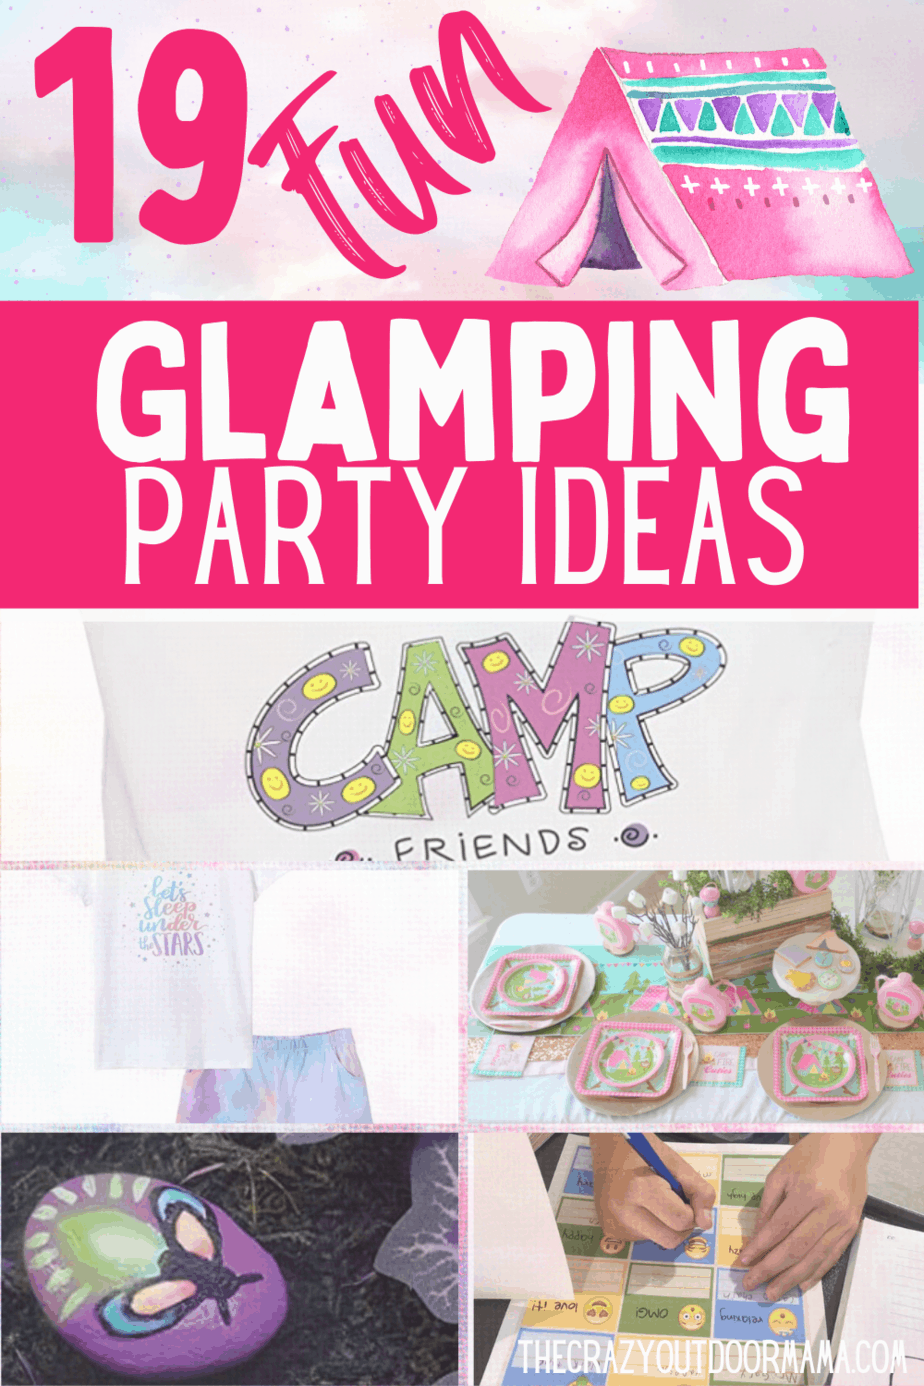 19 Backyard Glamping Party Ideas for Girls – The Crazy Outdoor Mama